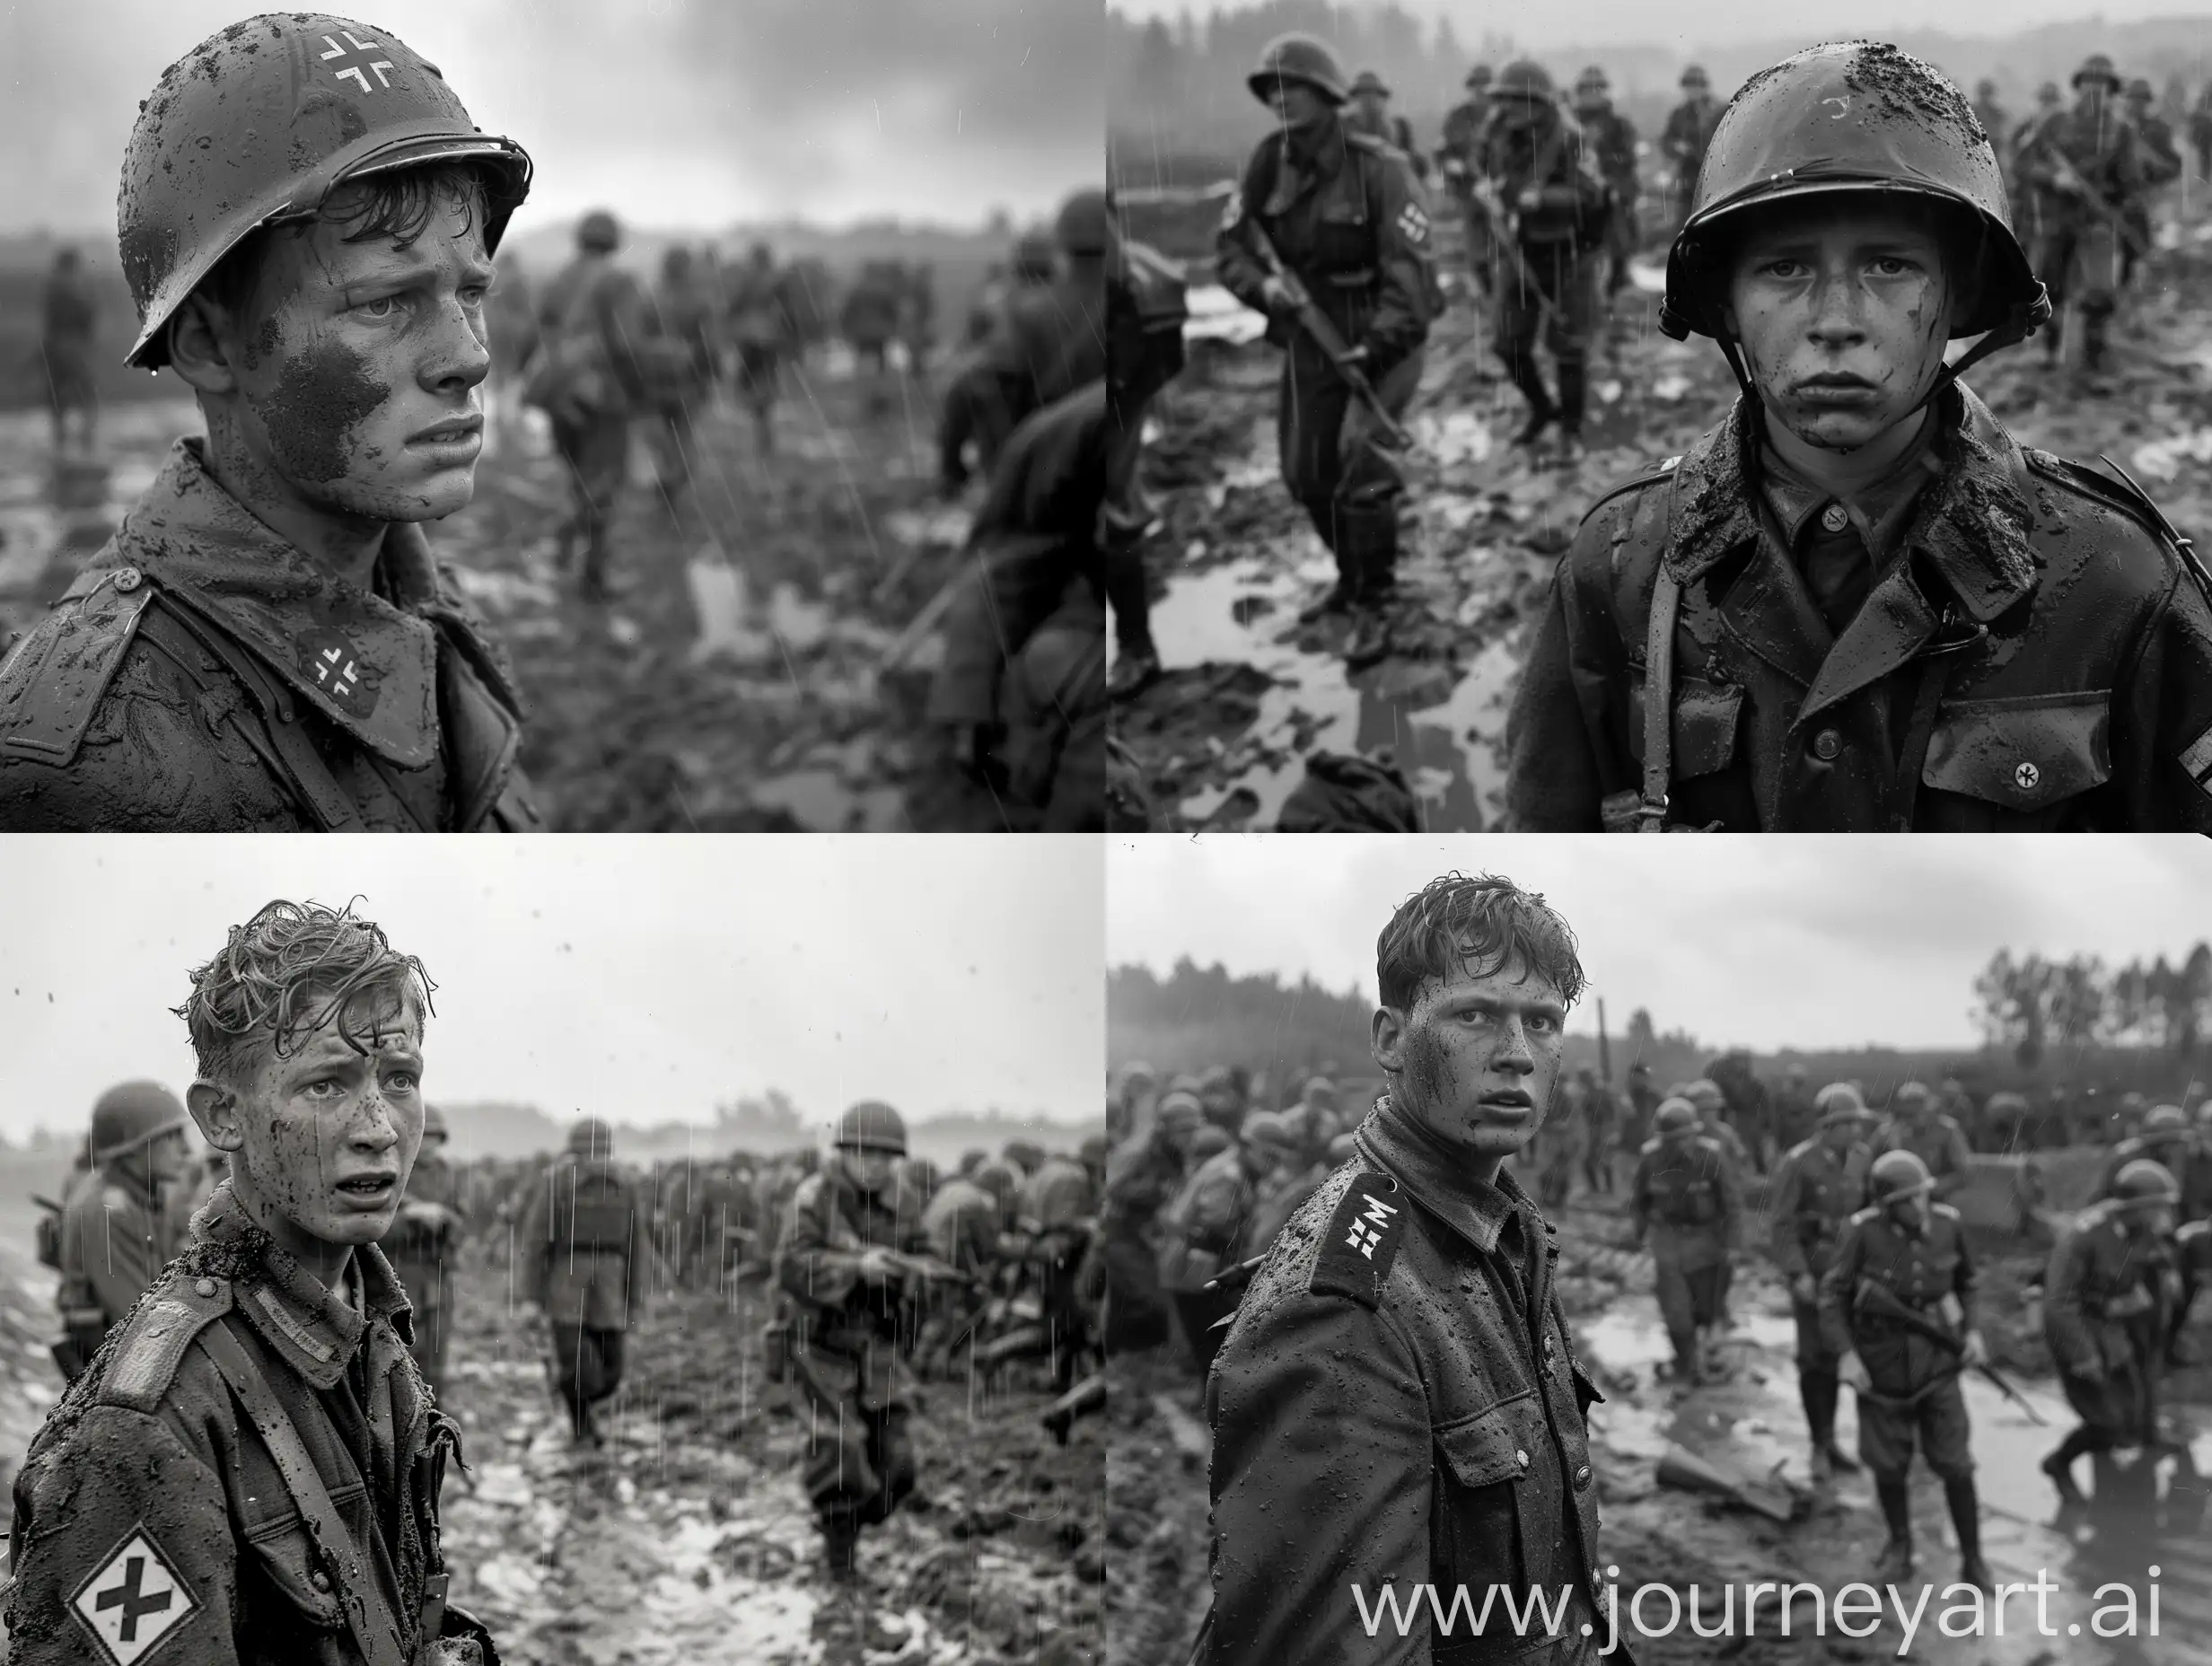 Young-German-Soldier-Lost-in-the-Chaos-of-WW2-Battle